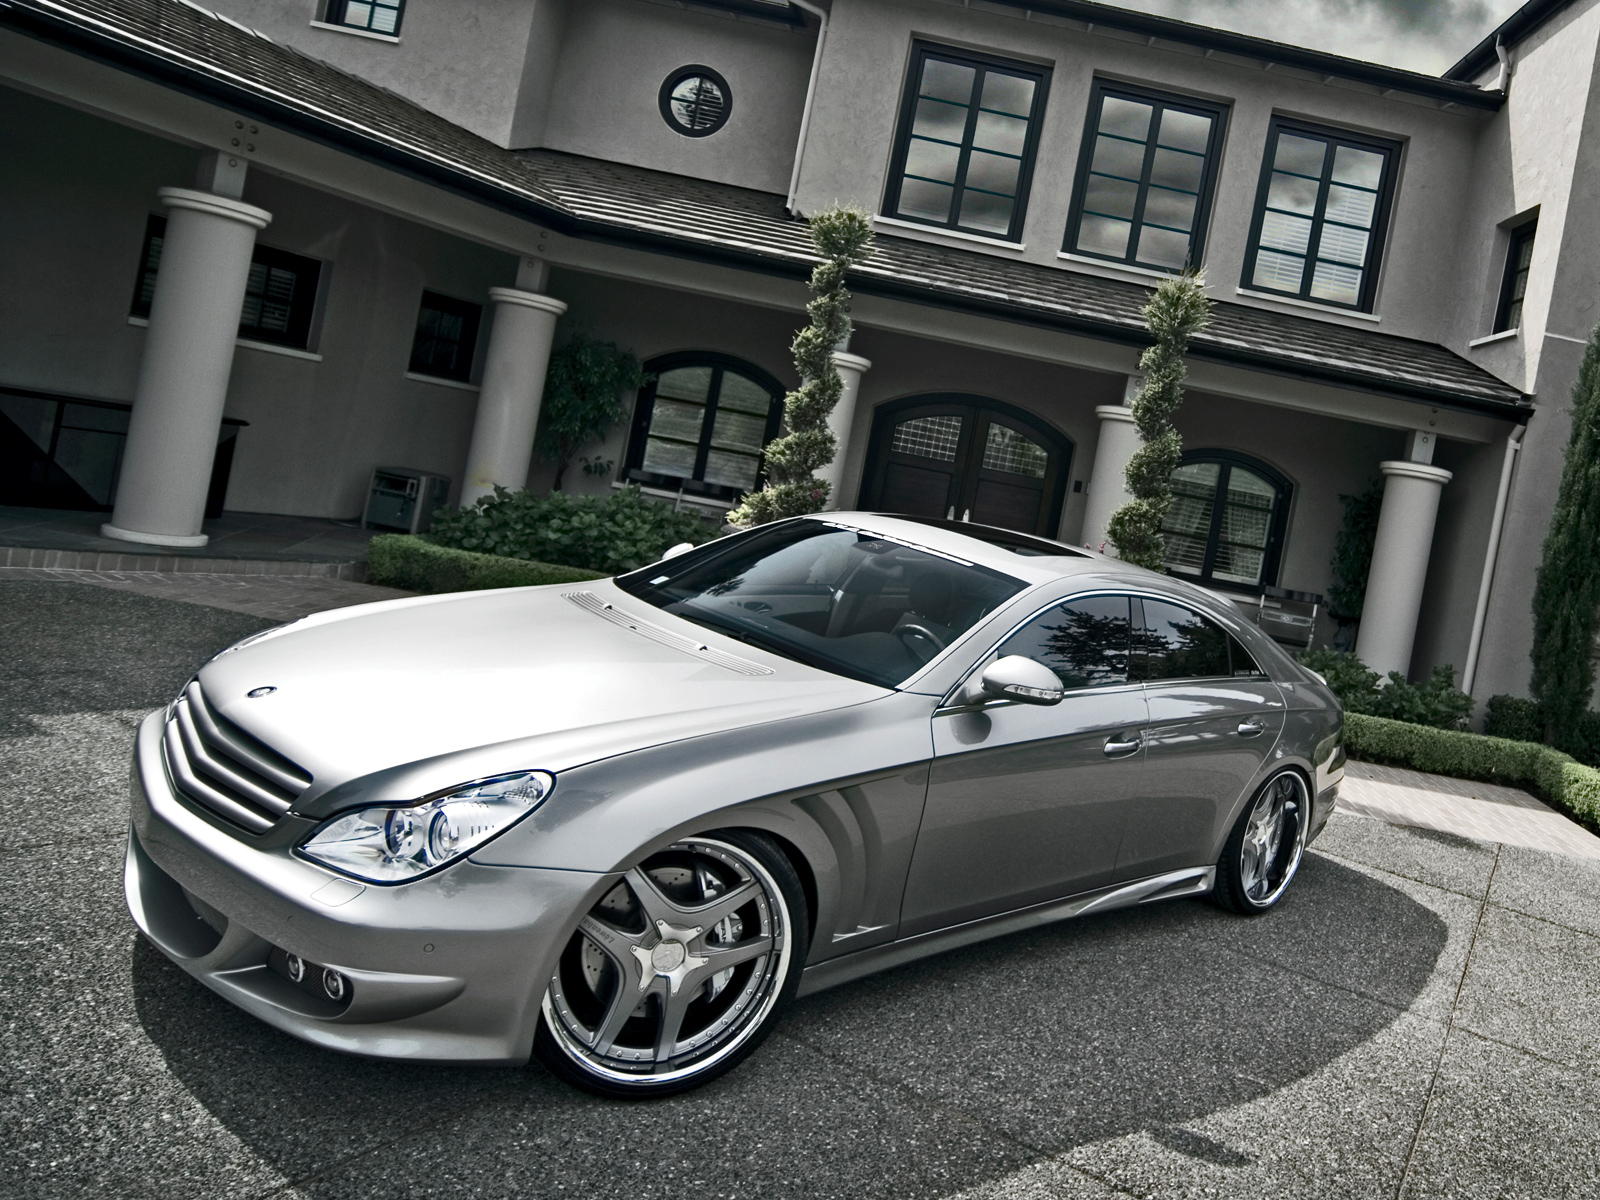 Nice Images Collection: Mercedes-benz Cls 55 Amg Desktop Wallpapers